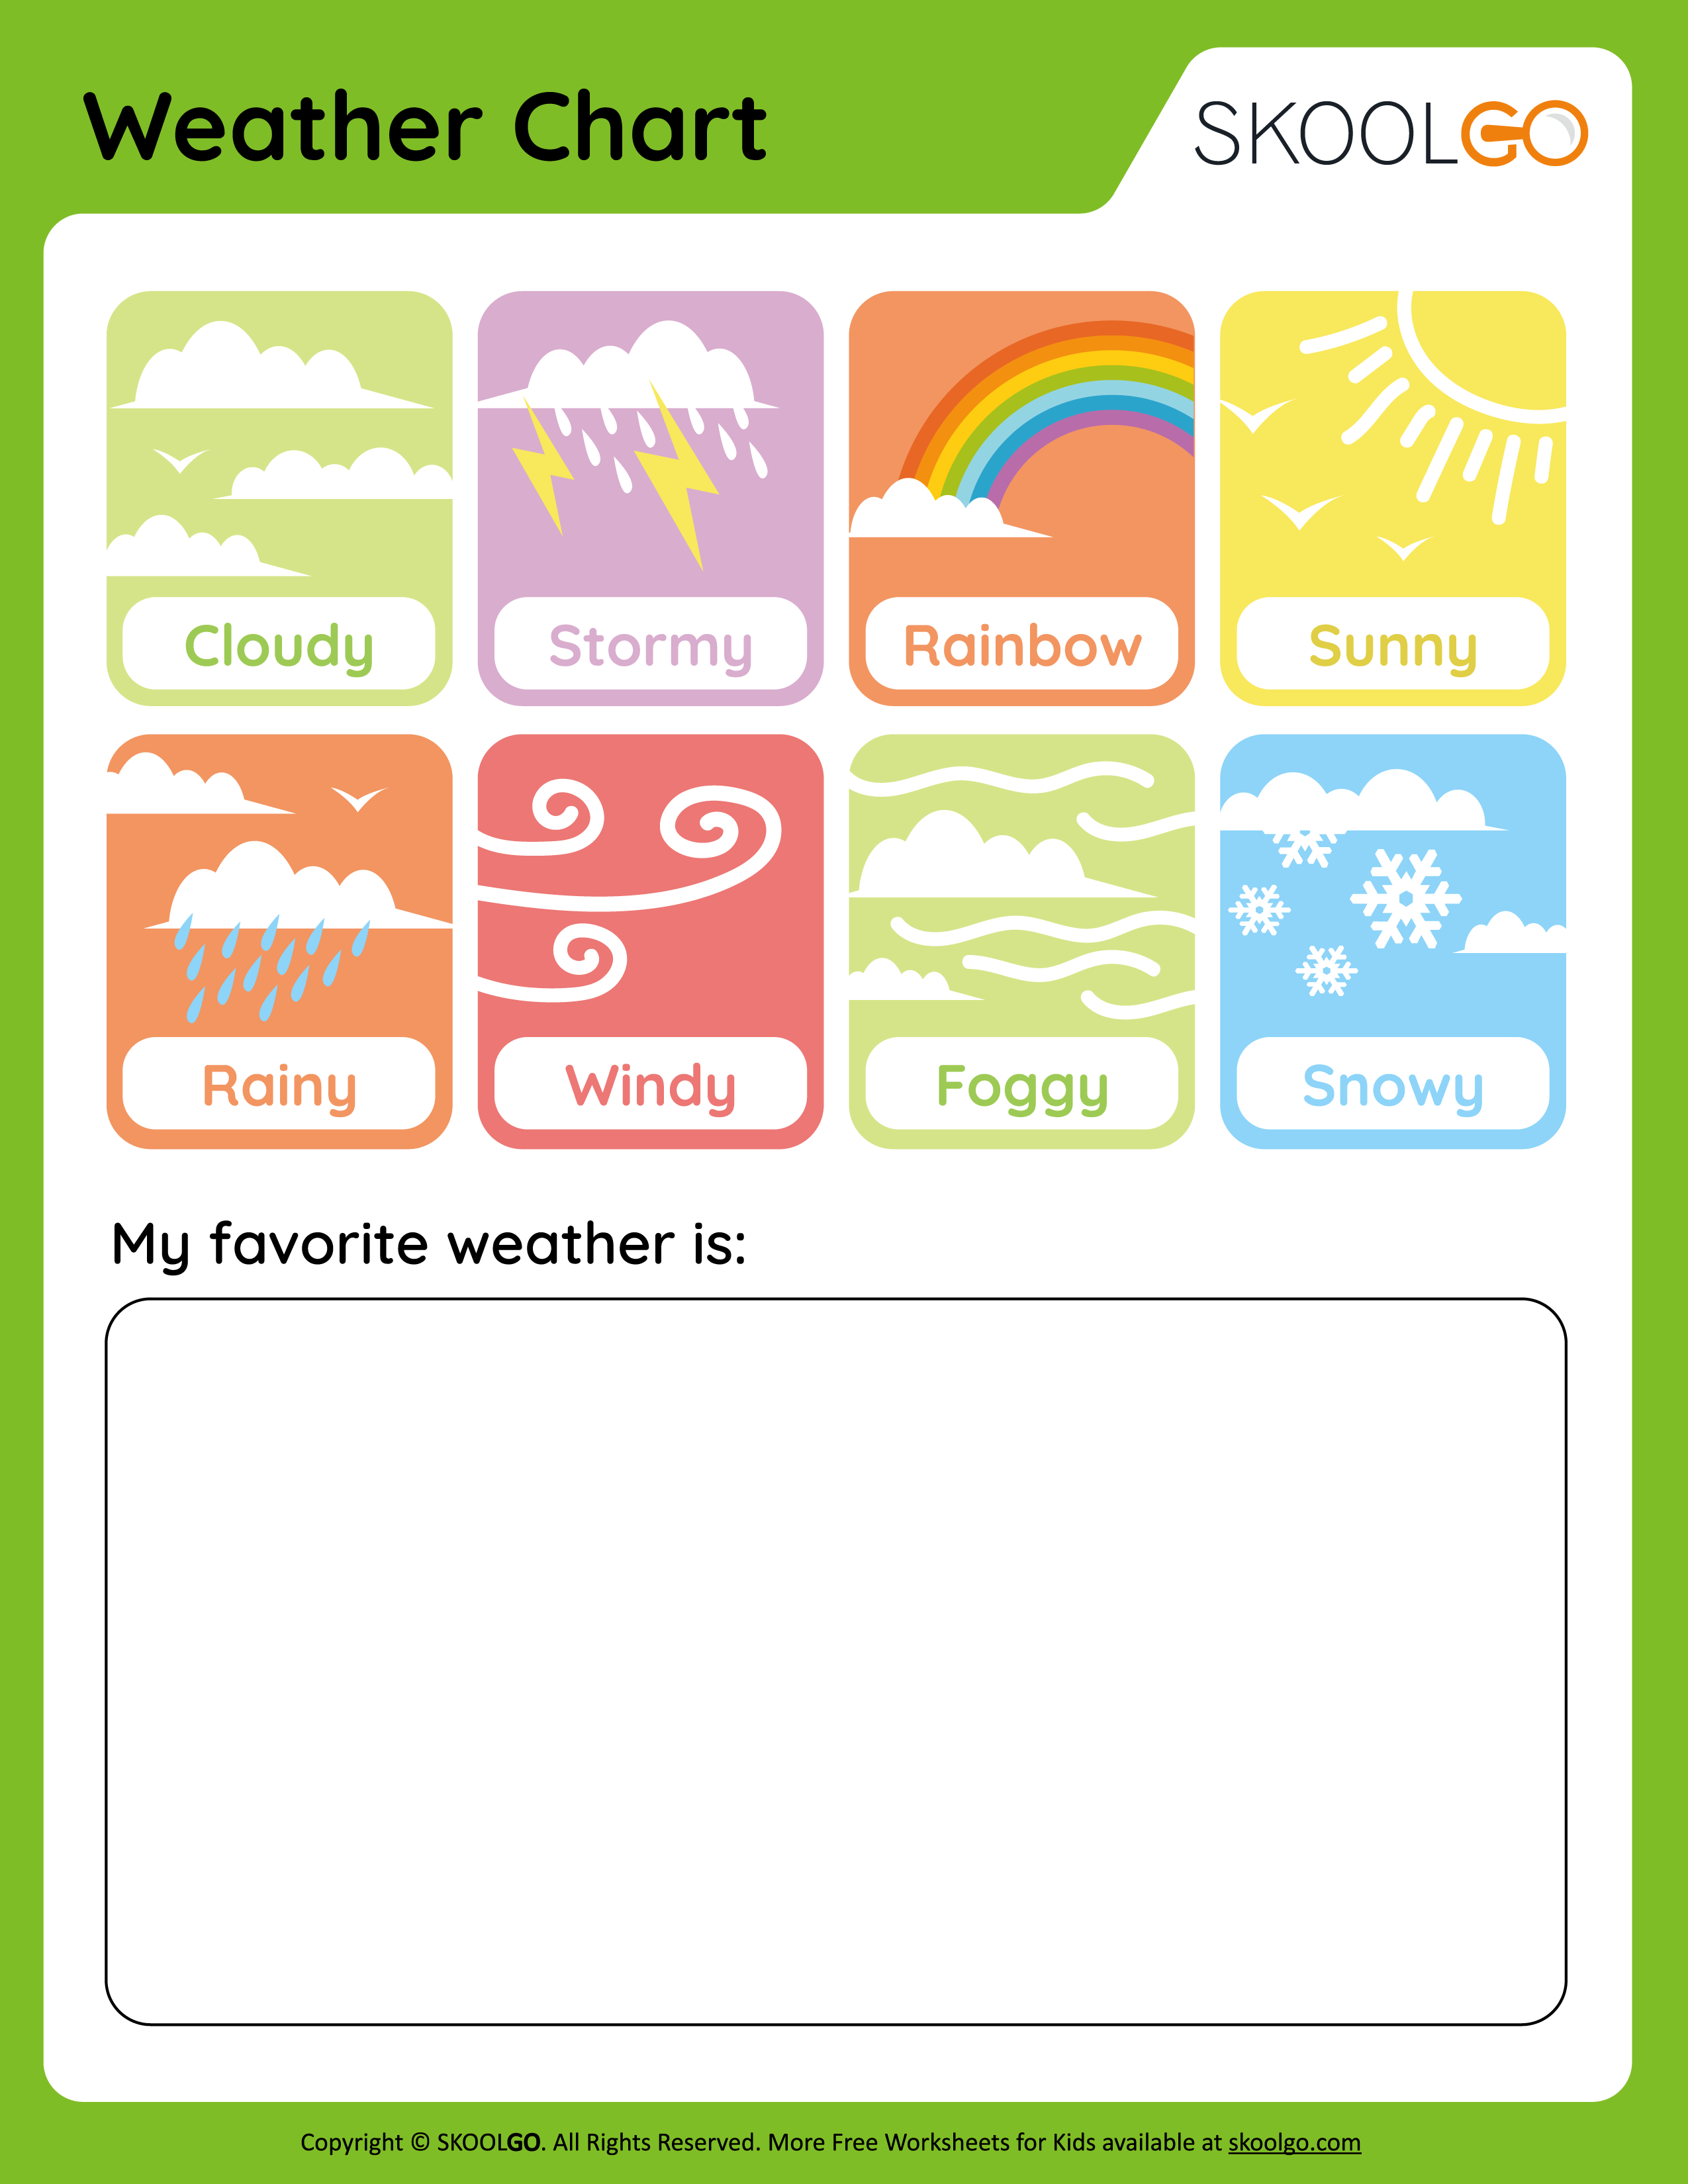 Weather Chart - Free Worksheet for Kids